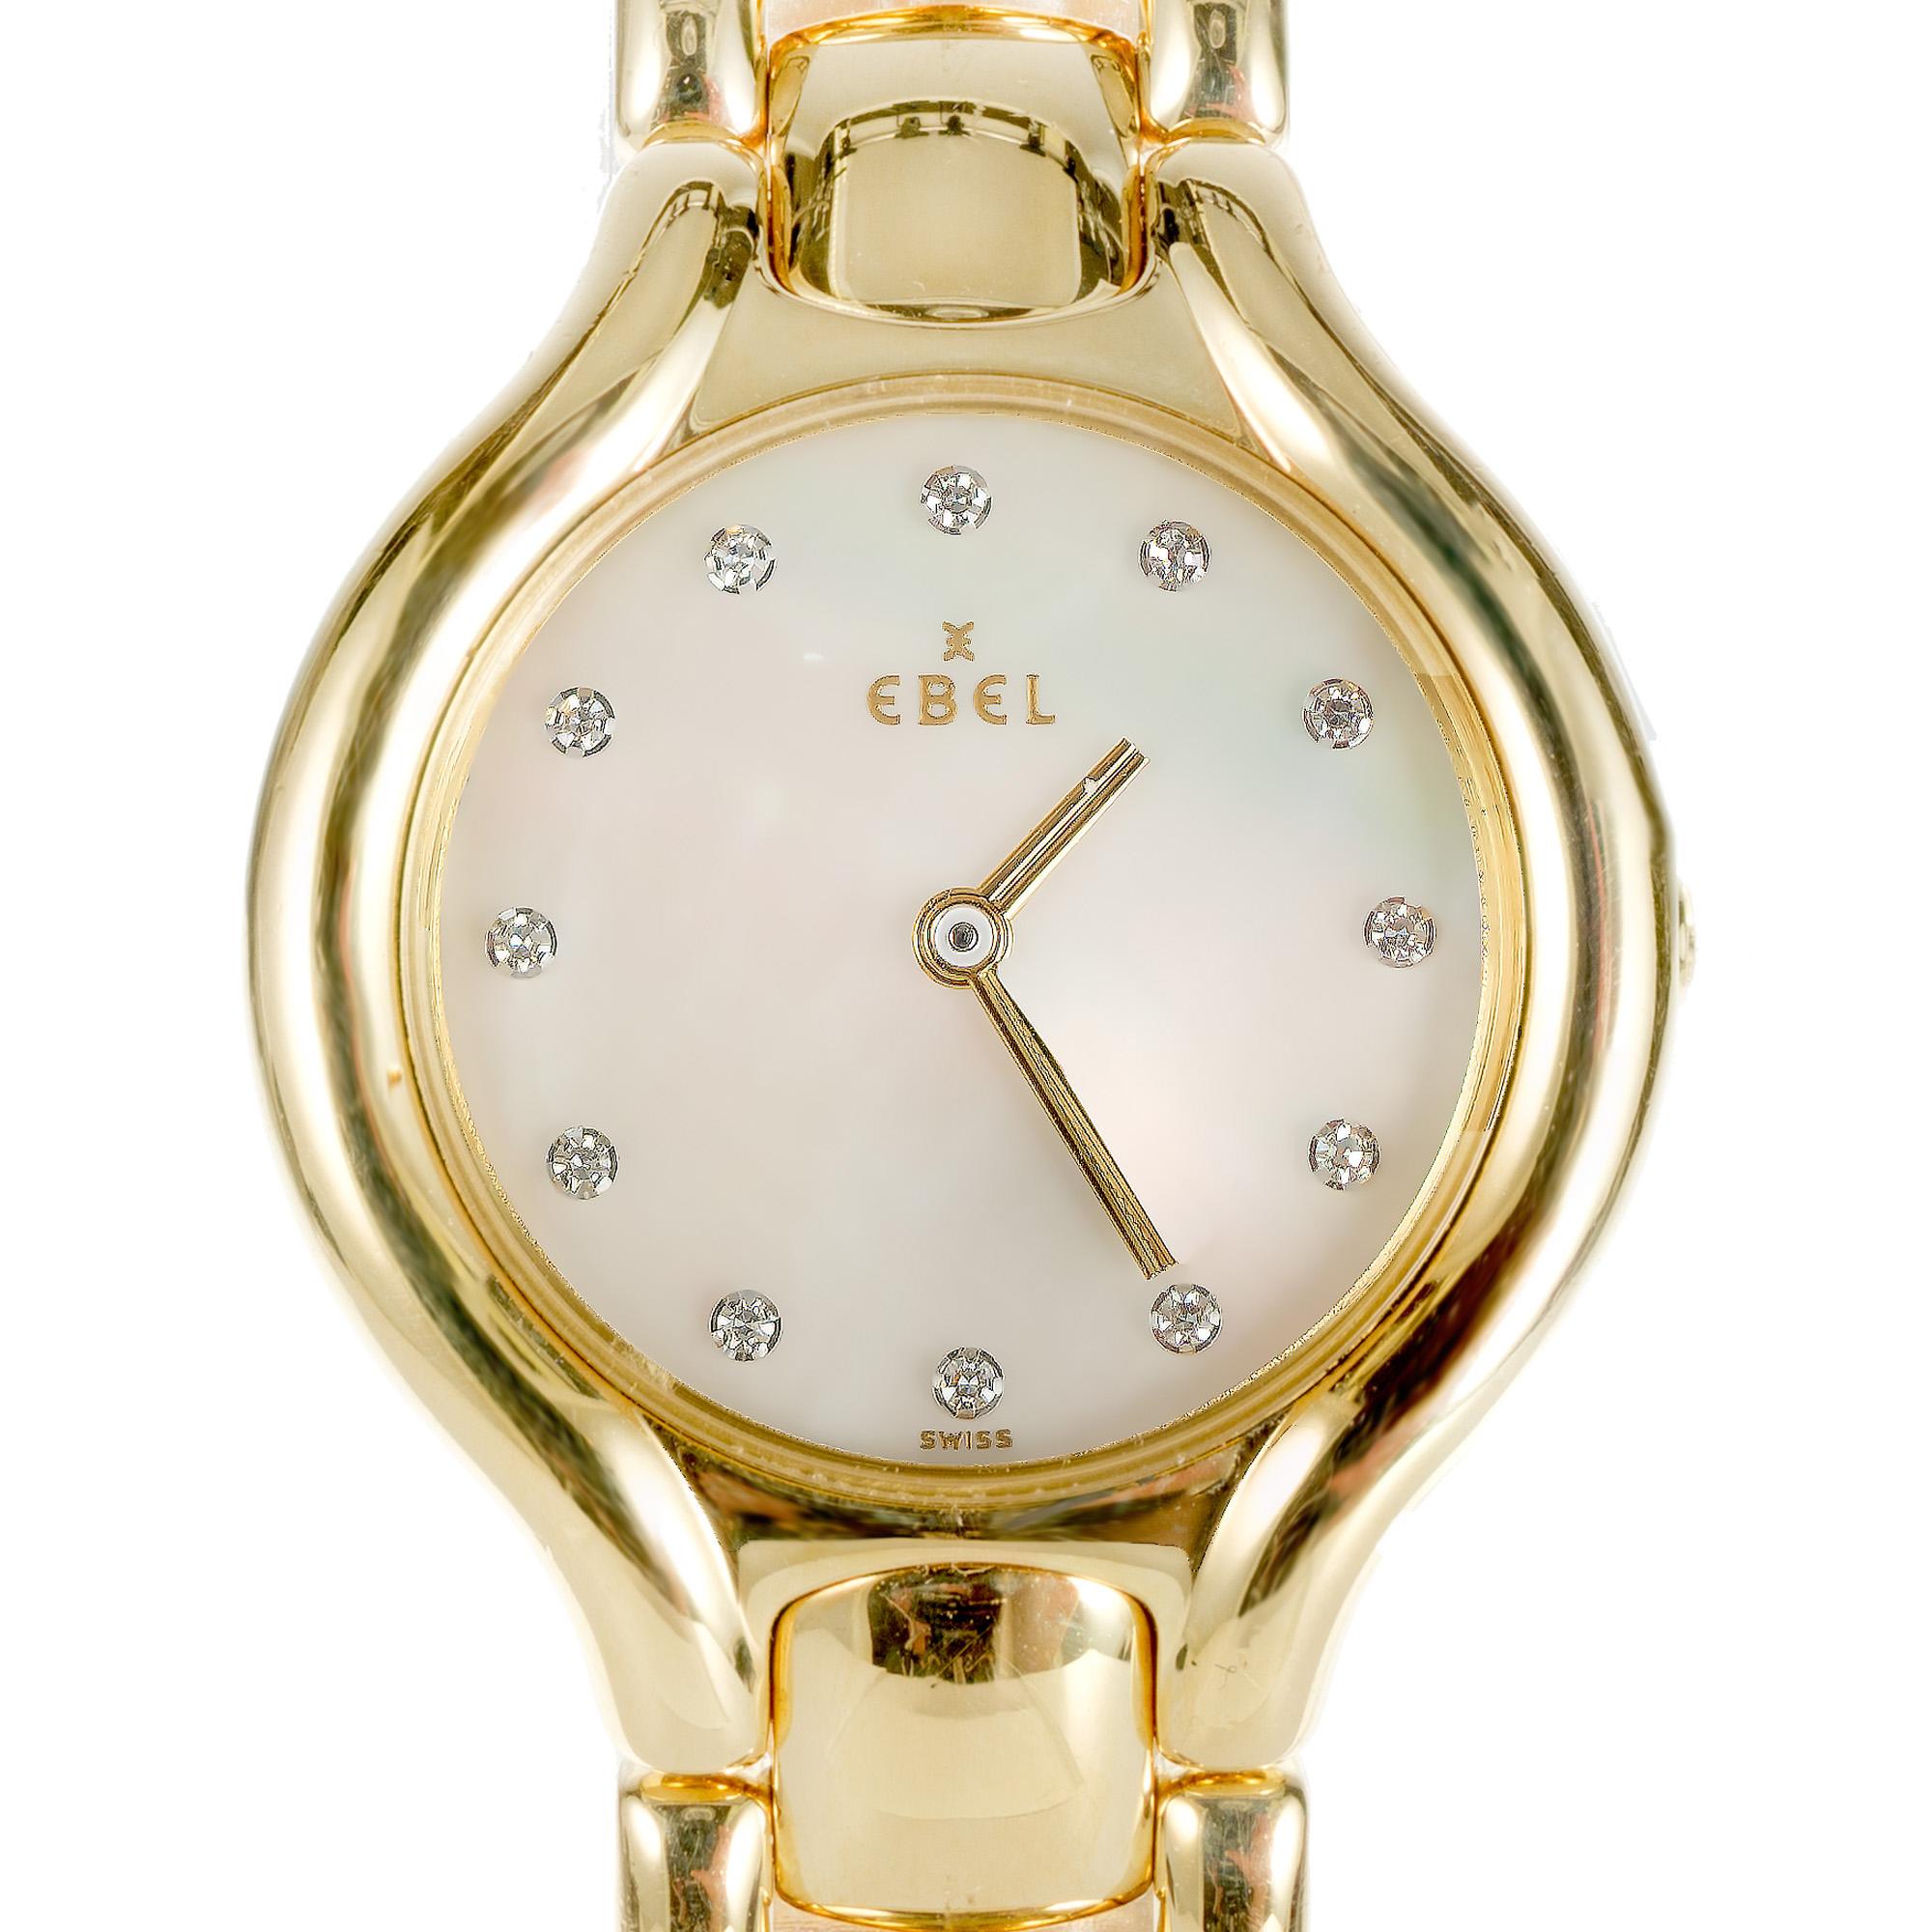 Restored ladies Ebel Beluga watch with mother of pearl diamond dial. Seven Inches long and easily shortened.

Length: 28mm
Width: 25mm
Band width at case: 12mm
Case thickness: 5.37mm
7Band: 18k yellow gold 
Crystal: sapphire
Dial: mother of